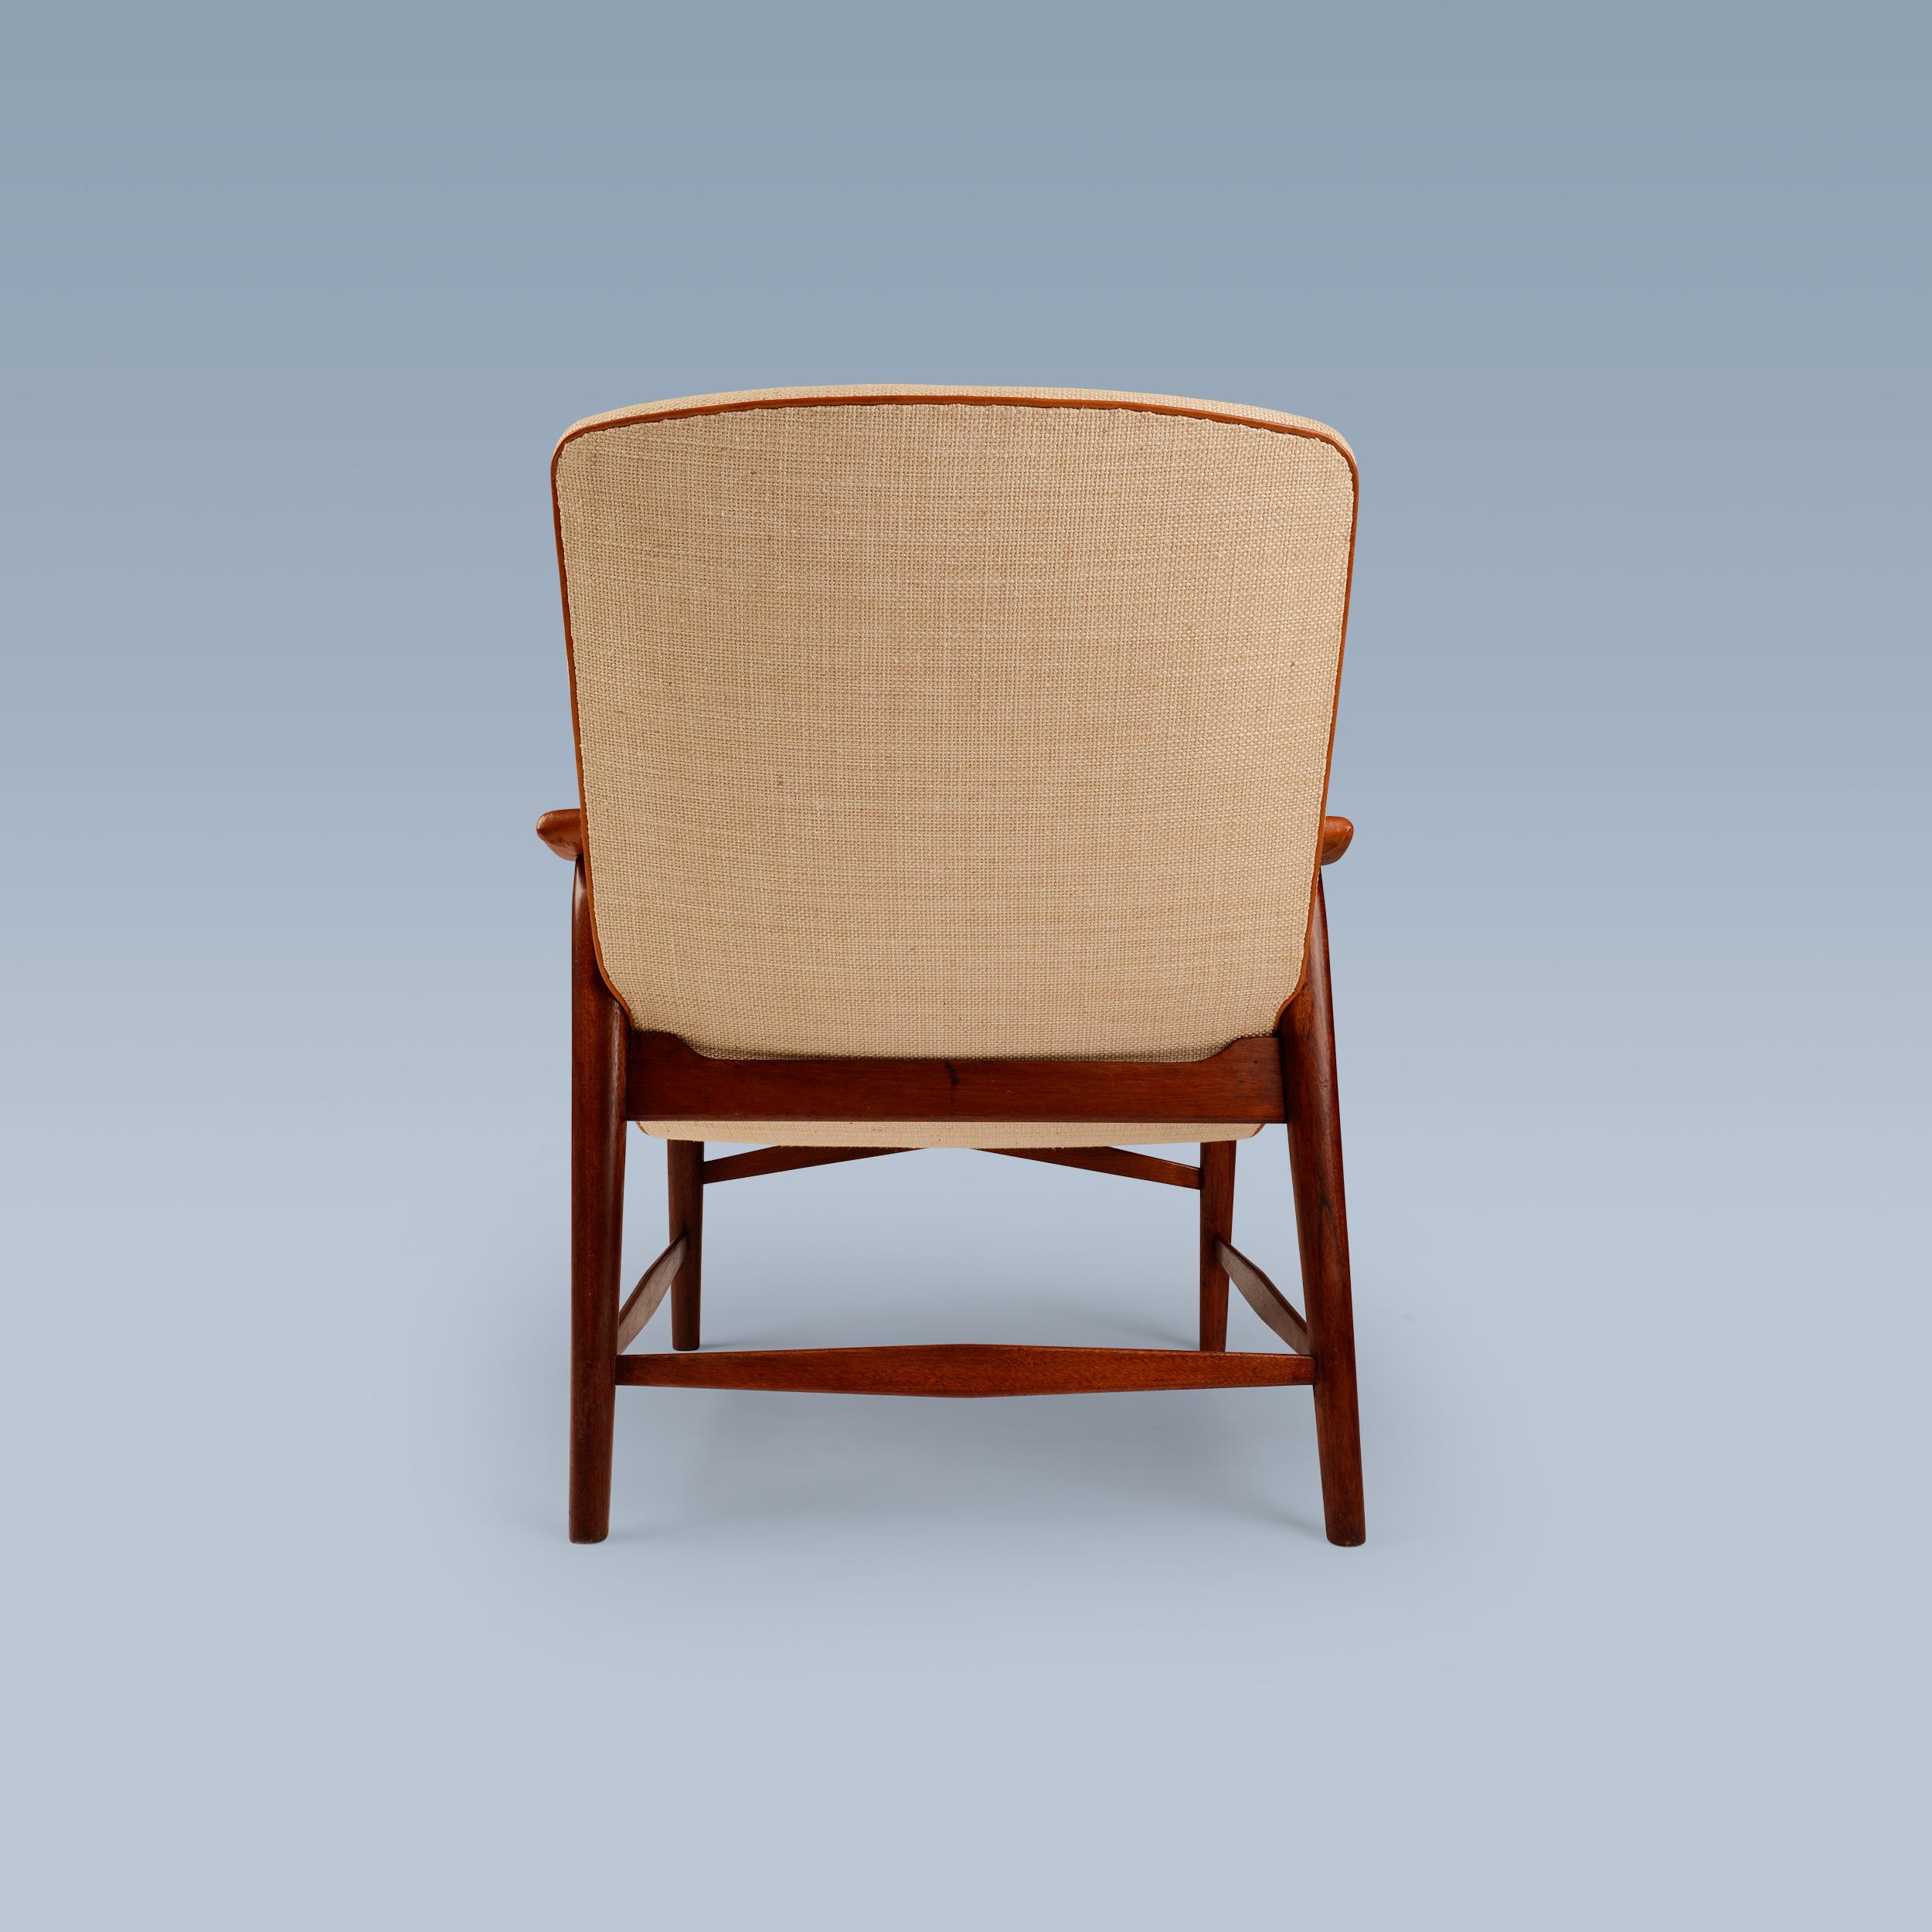 Leather Teak chair with curvy seat upholstered with light fabric and leather details For Sale